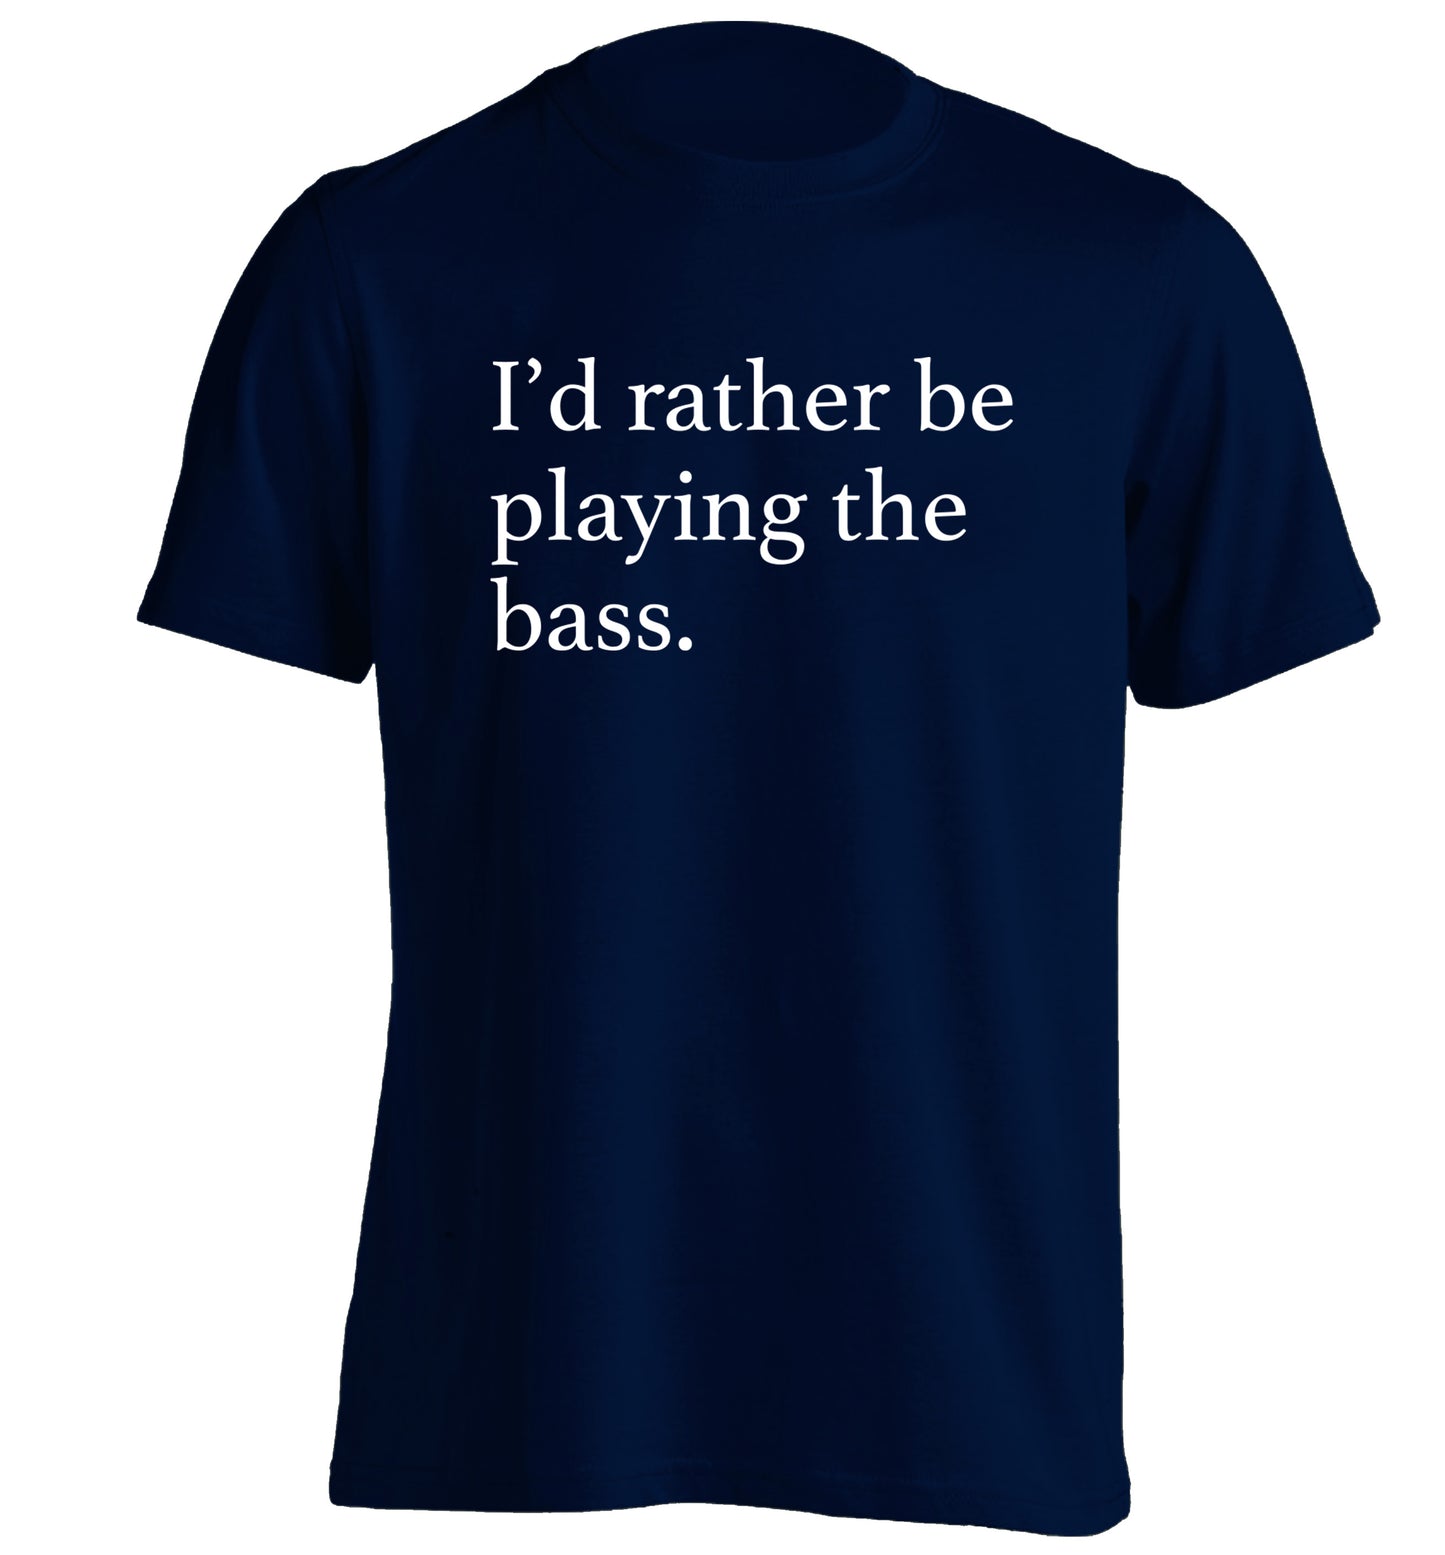 I'd rather by playing the bass adults unisex navy Tshirt 2XL